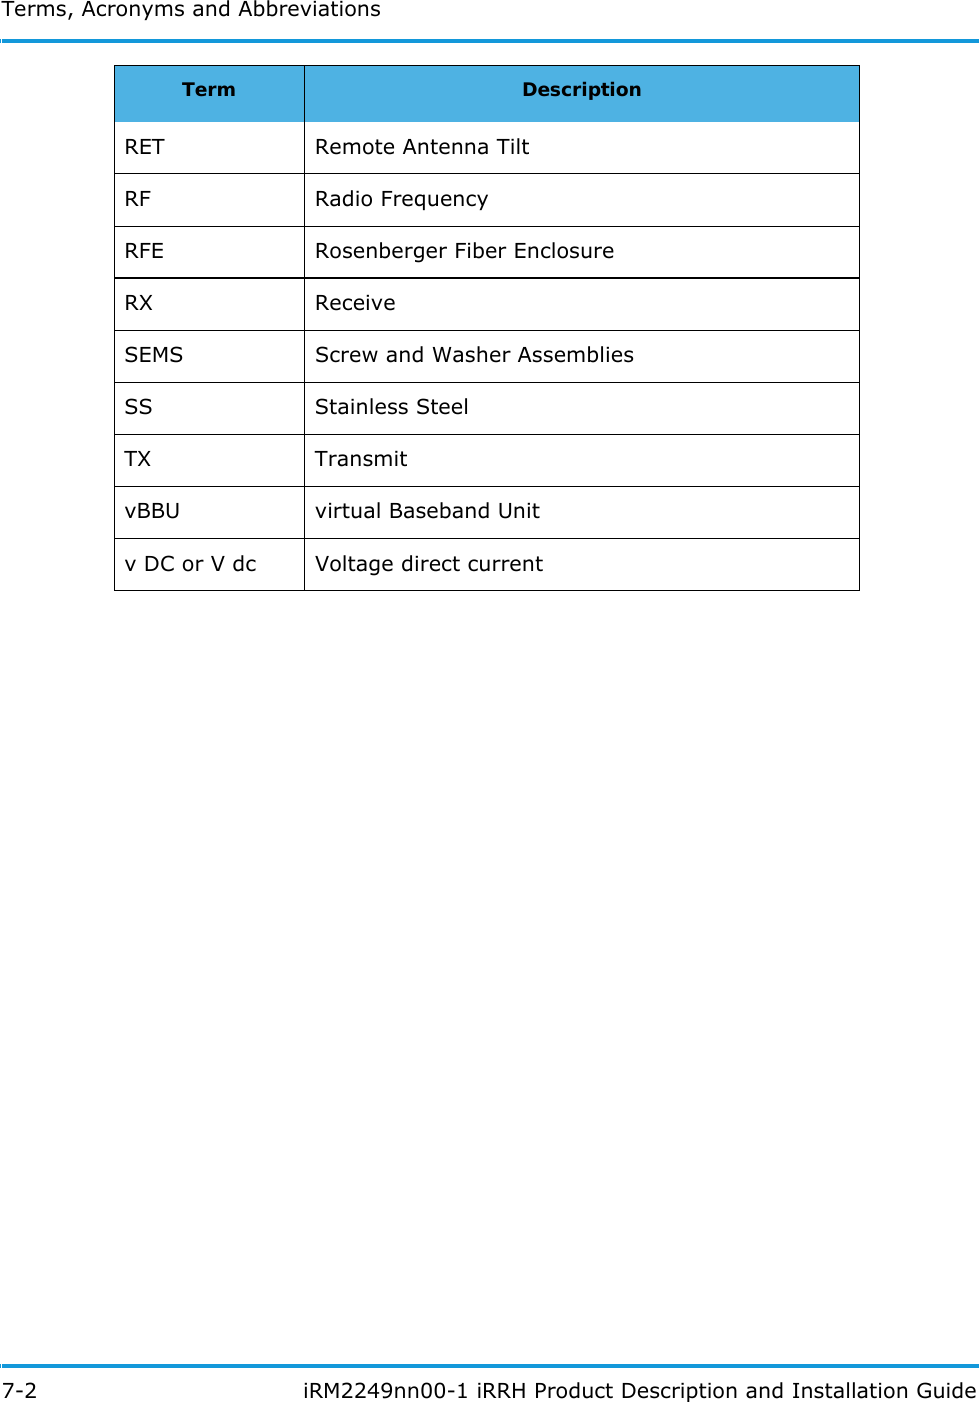 Terms, Acronyms and Abbreviations7-2  iRM2249nn00-1 iRRH Product Description and Installation GuideRET Remote Antenna TiltRF Radio FrequencyRFE Rosenberger Fiber EnclosureRX ReceiveSEMS Screw and Washer AssembliesSS Stainless SteelTX TransmitvBBU virtual Baseband Unitv DC or V dc Voltage direct currentTerm Description